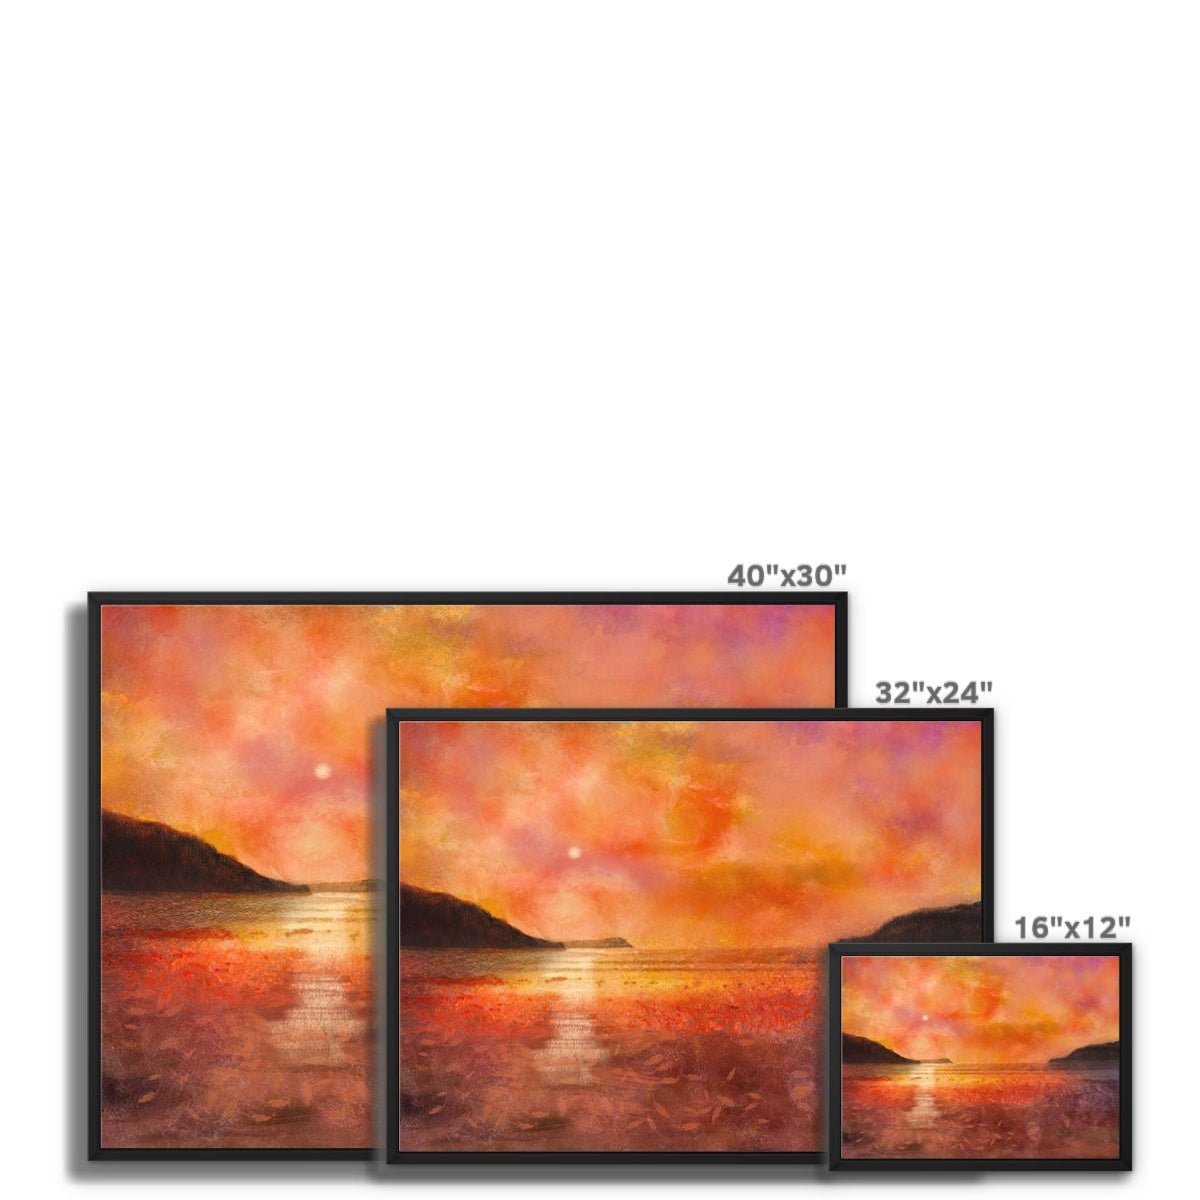 Calgary Beach Sunset Mull Painting | Framed Canvas From Scotland-Floating Framed Canvas Prints-Hebridean Islands Art Gallery-Paintings, Prints, Homeware, Art Gifts From Scotland By Scottish Artist Kevin Hunter